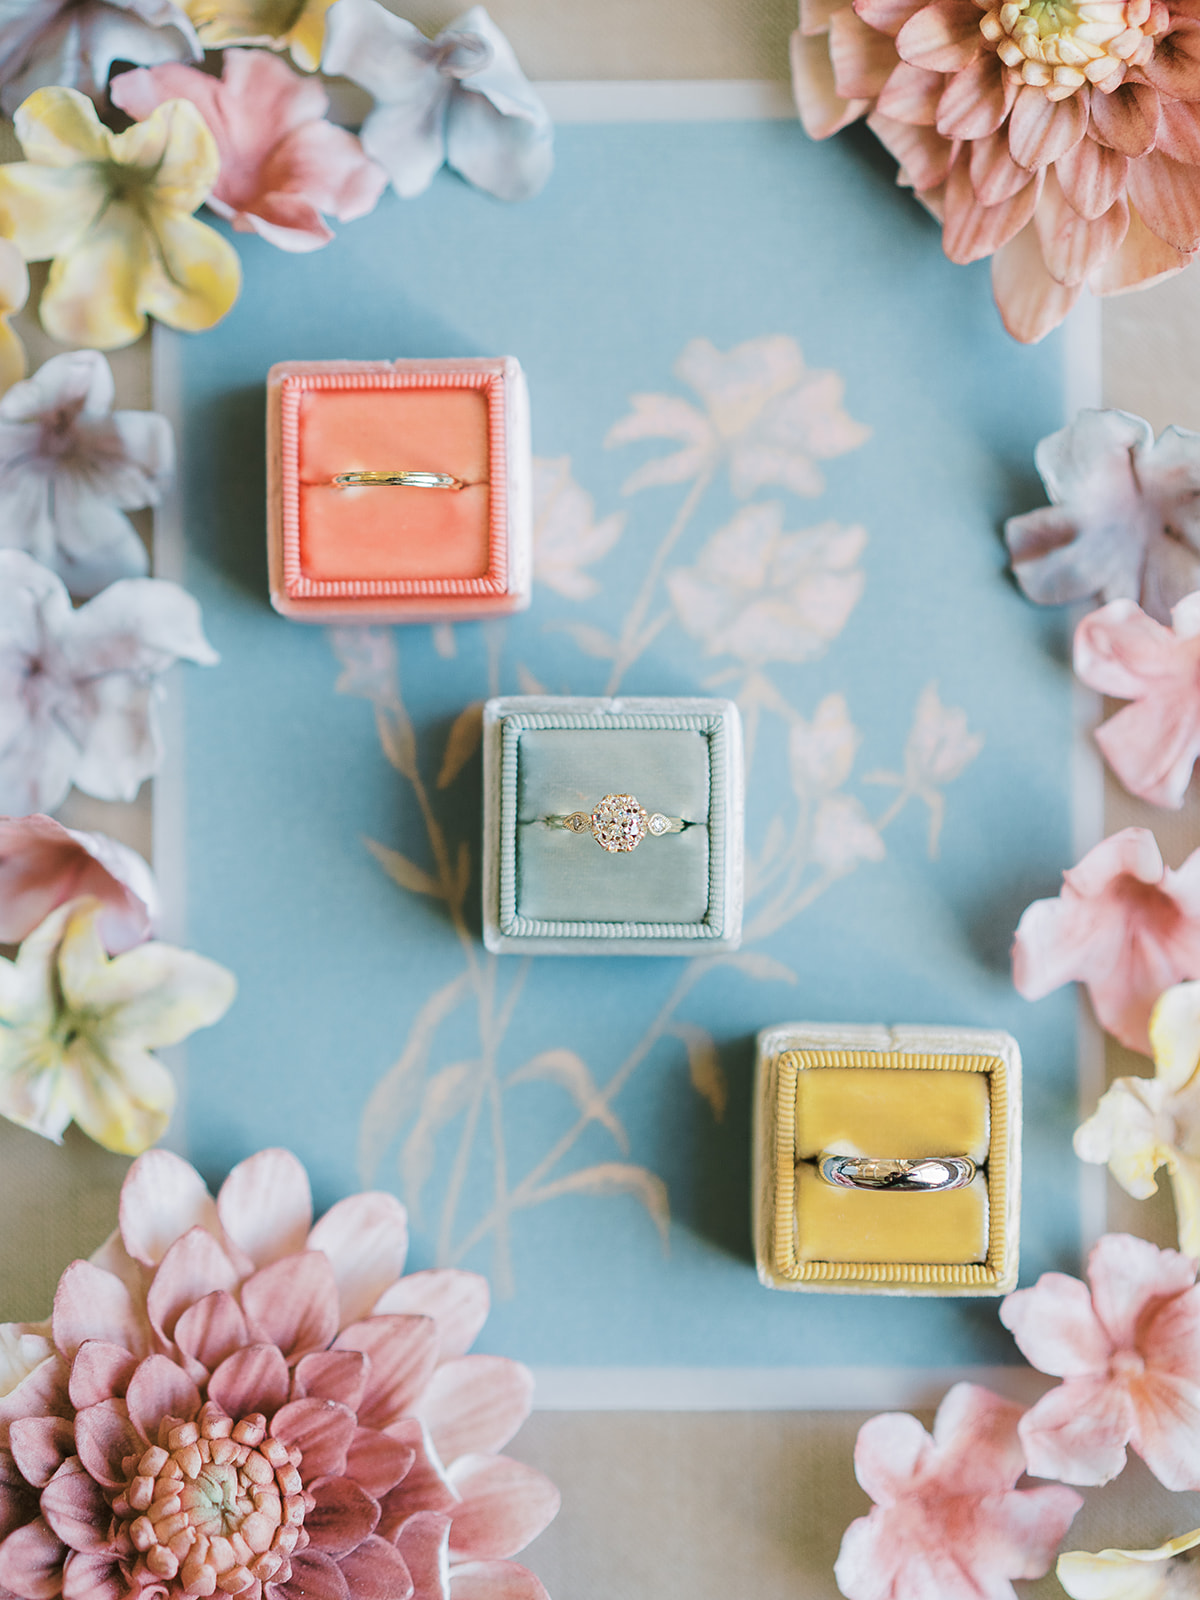 Vintage engagement ring with marquise cut accent diamond tapering the center round cut diamond in citrus velvet ring boxes; styling by luxury wedding planner Willow & Oak with photography by Kylee Yee